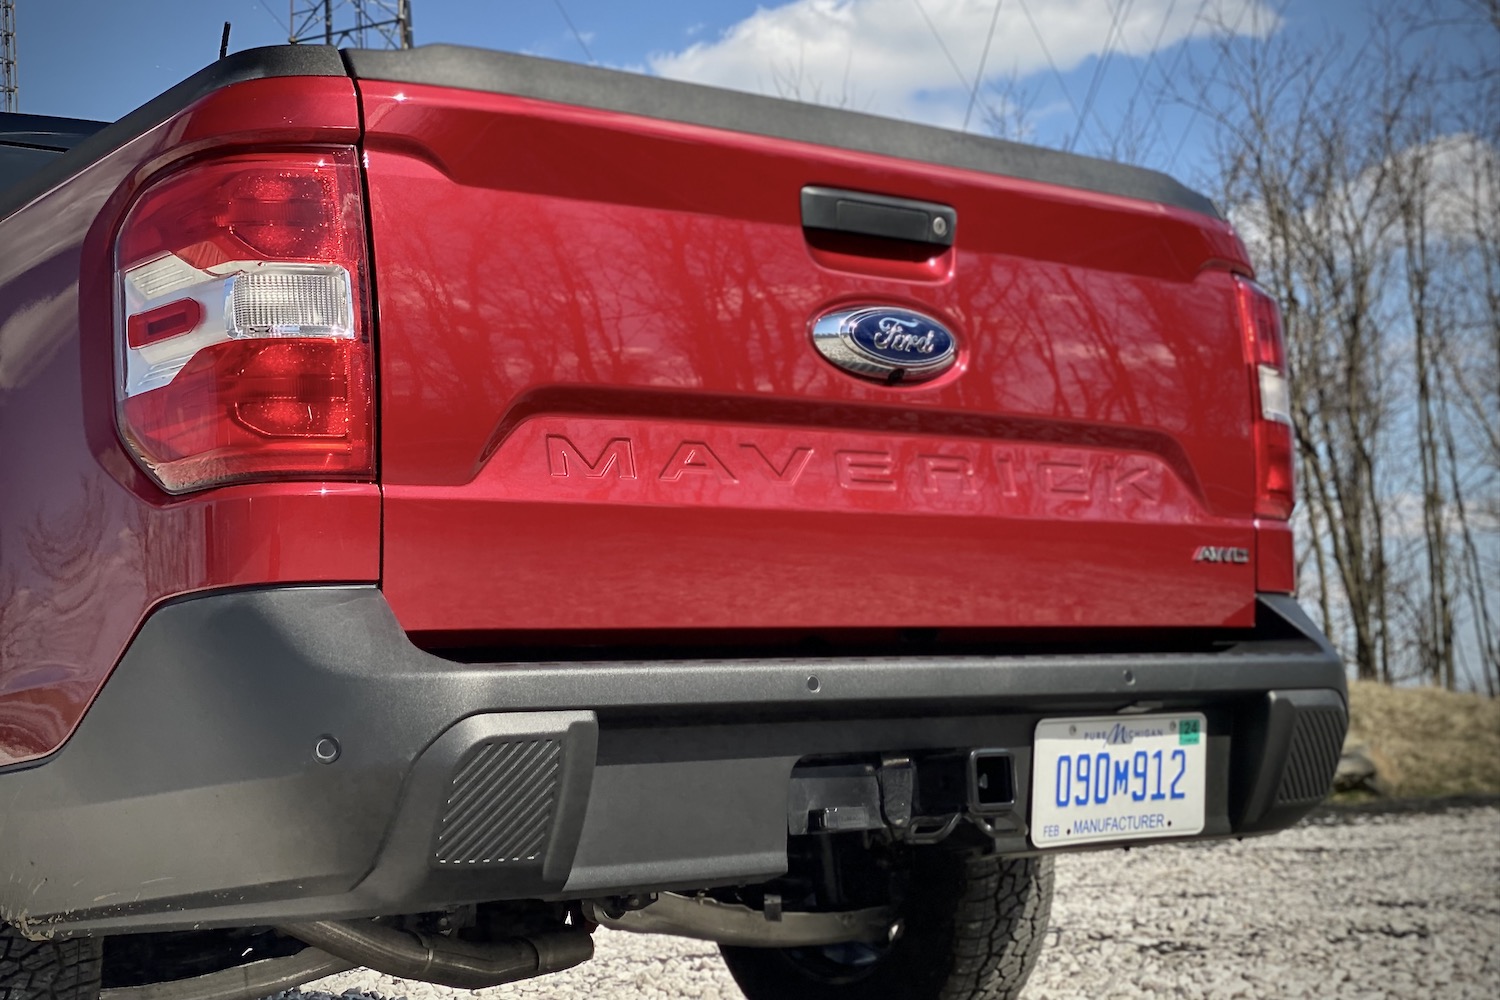 2022 Ford Maverick rear end close up of tailgate and rear badging in a gravel parking lot.